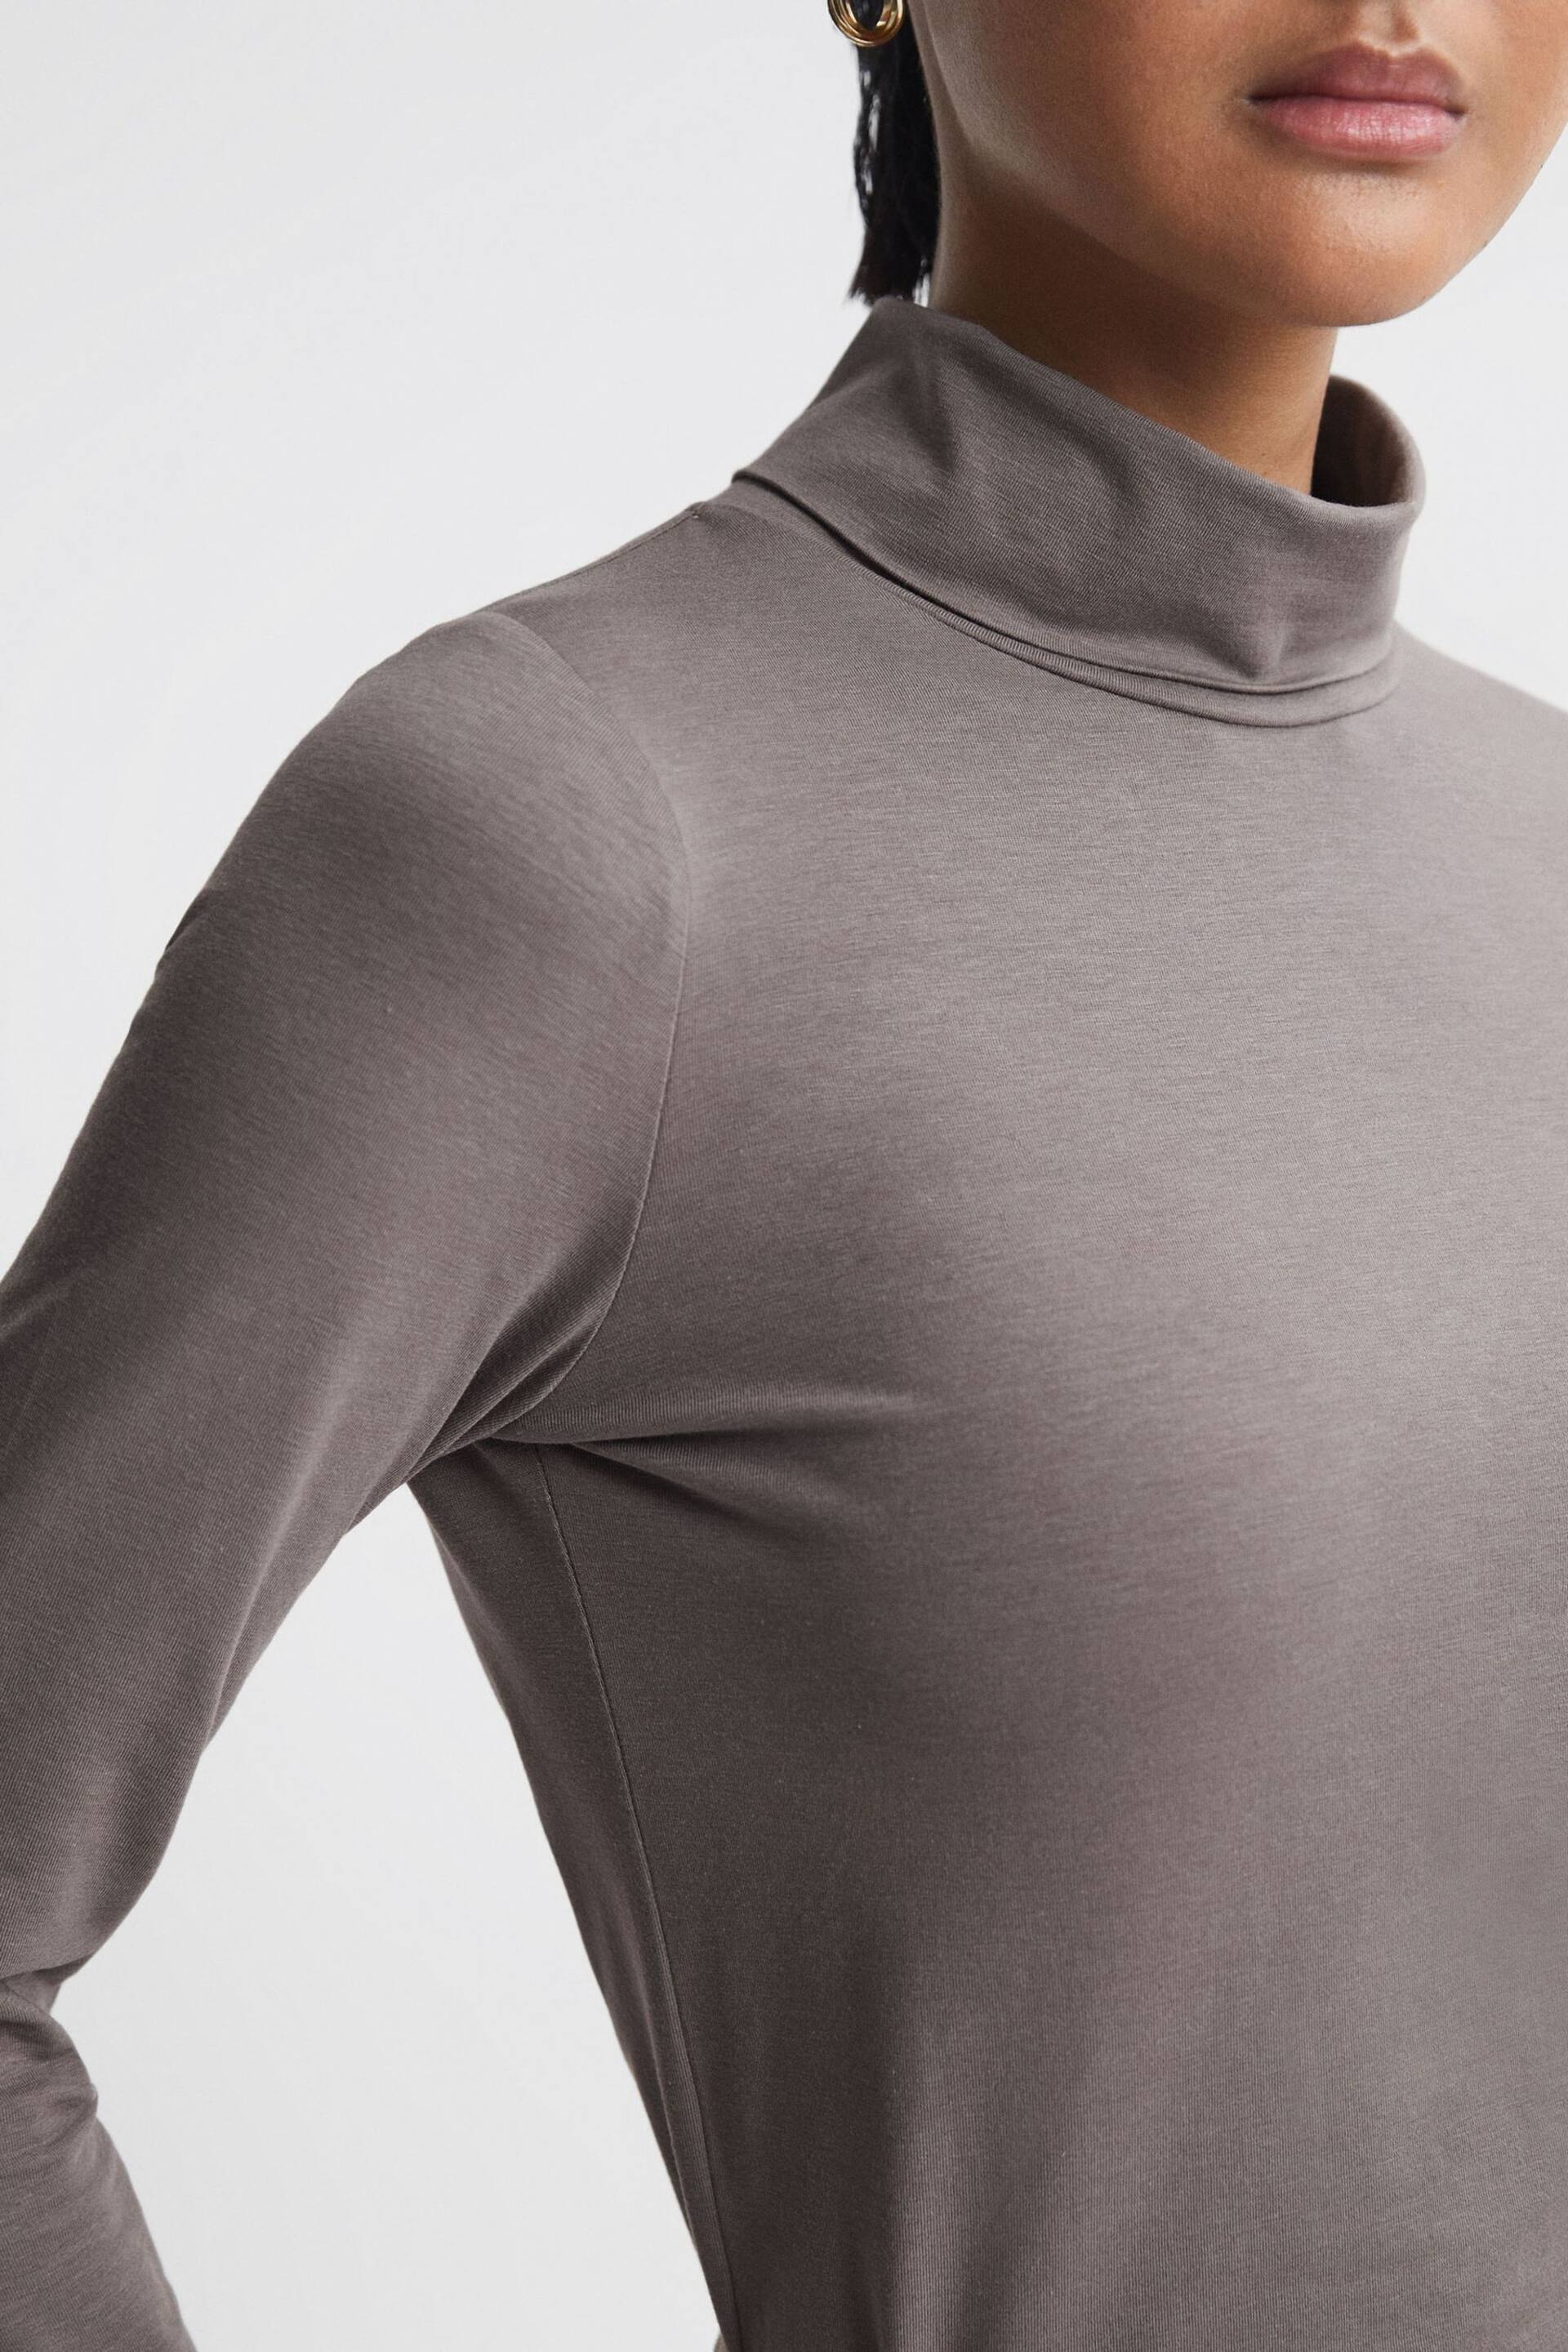 Reiss Taupe Piper Fitted Roll Neck T-Shirt - Image 1 of 5